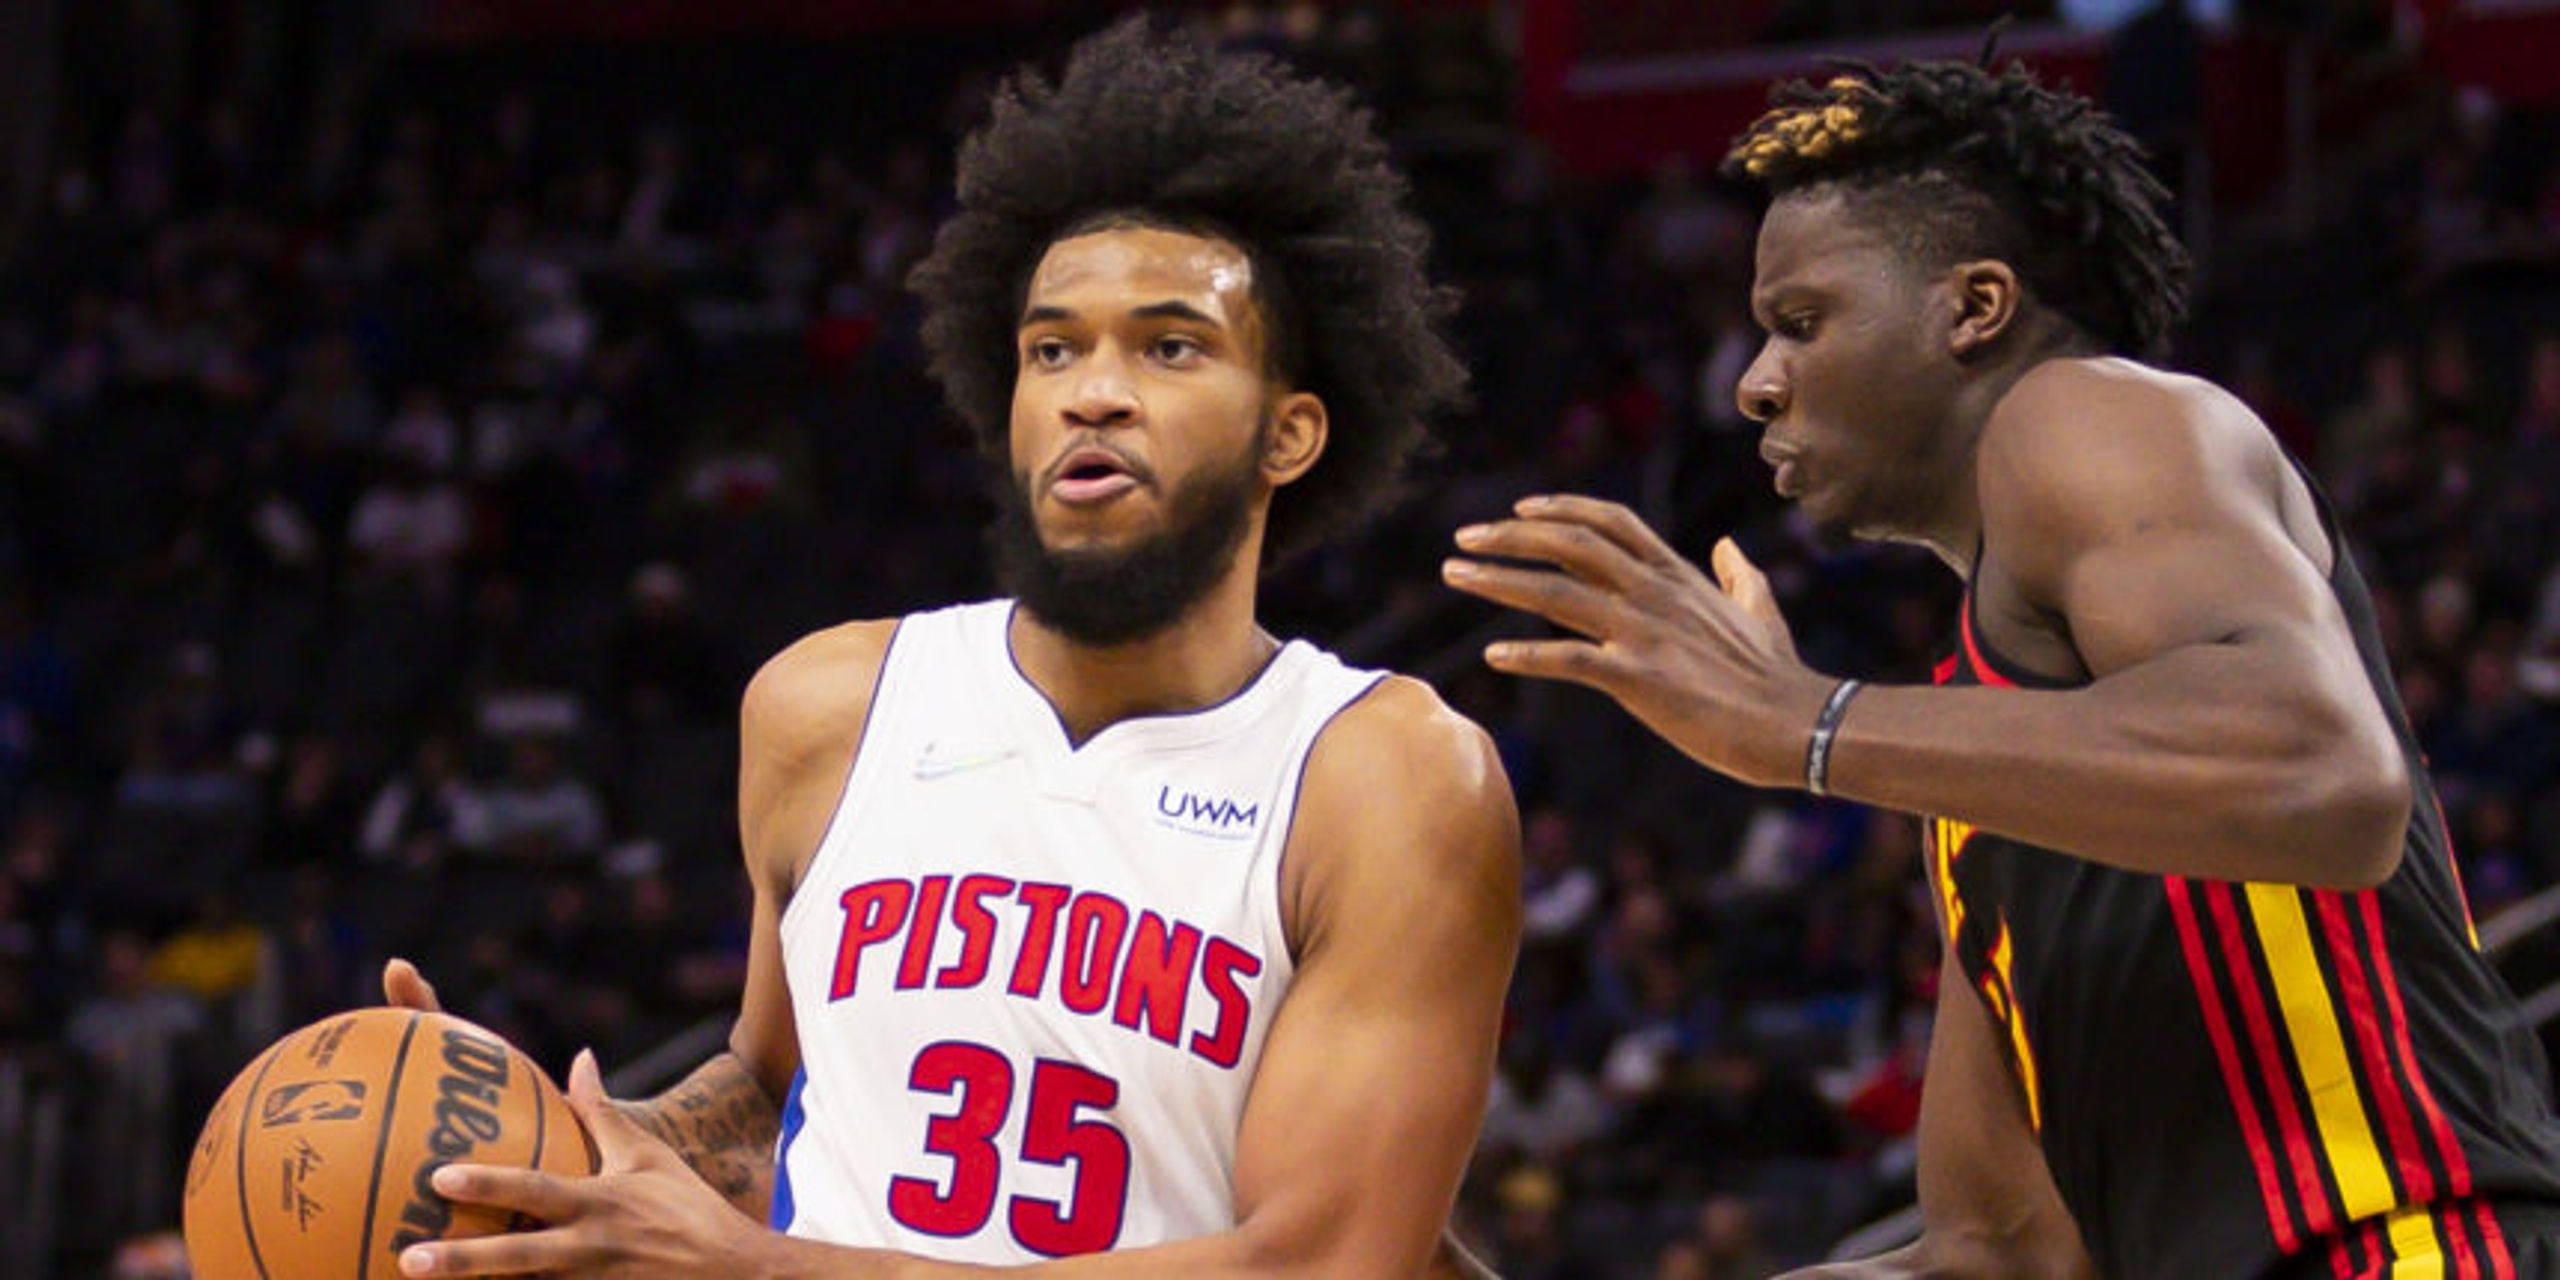 For Marvin Bagley III, an opportunity is knocking with the Pistons